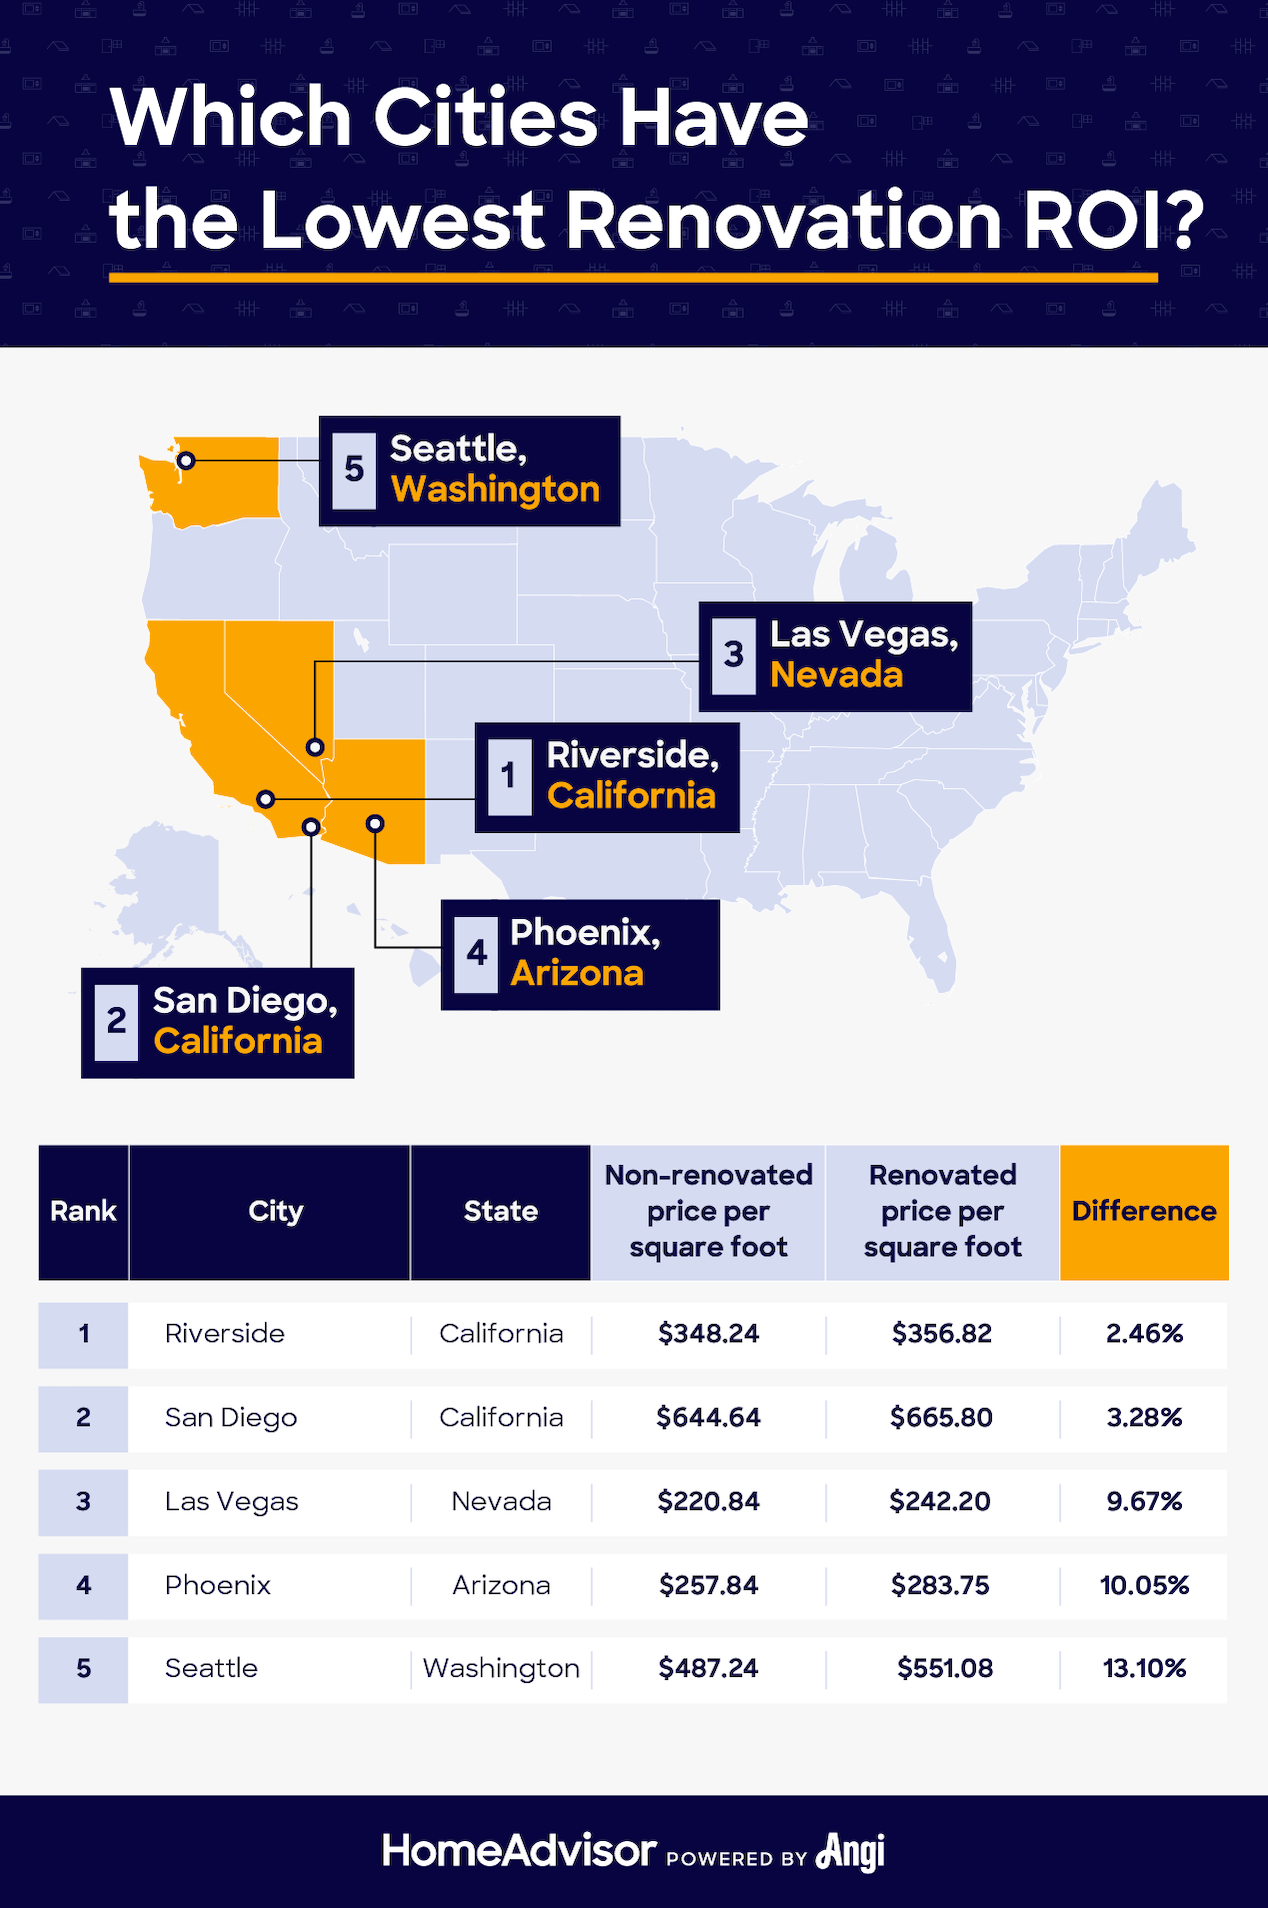 cities with the lowest renovation roi